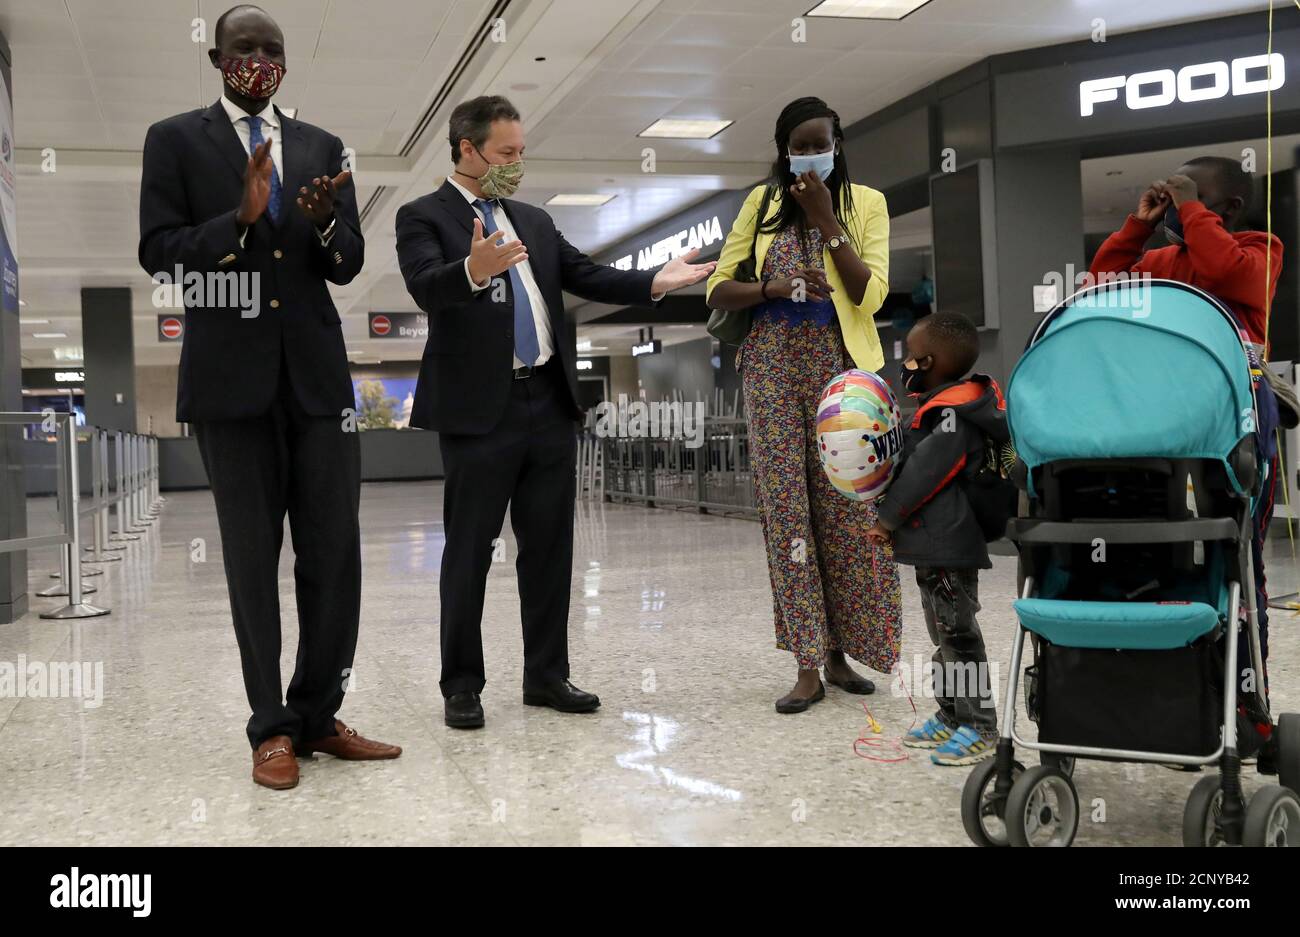 South Sudanese economist Peter Biar Ajak, his wife Nyathon Hoth Mai, and  their children Deng Biar, 7, (far R), Baraka Biar Ajak, 3, (C) and Isabelle  Biar Ajak, (in stroller), are greeted